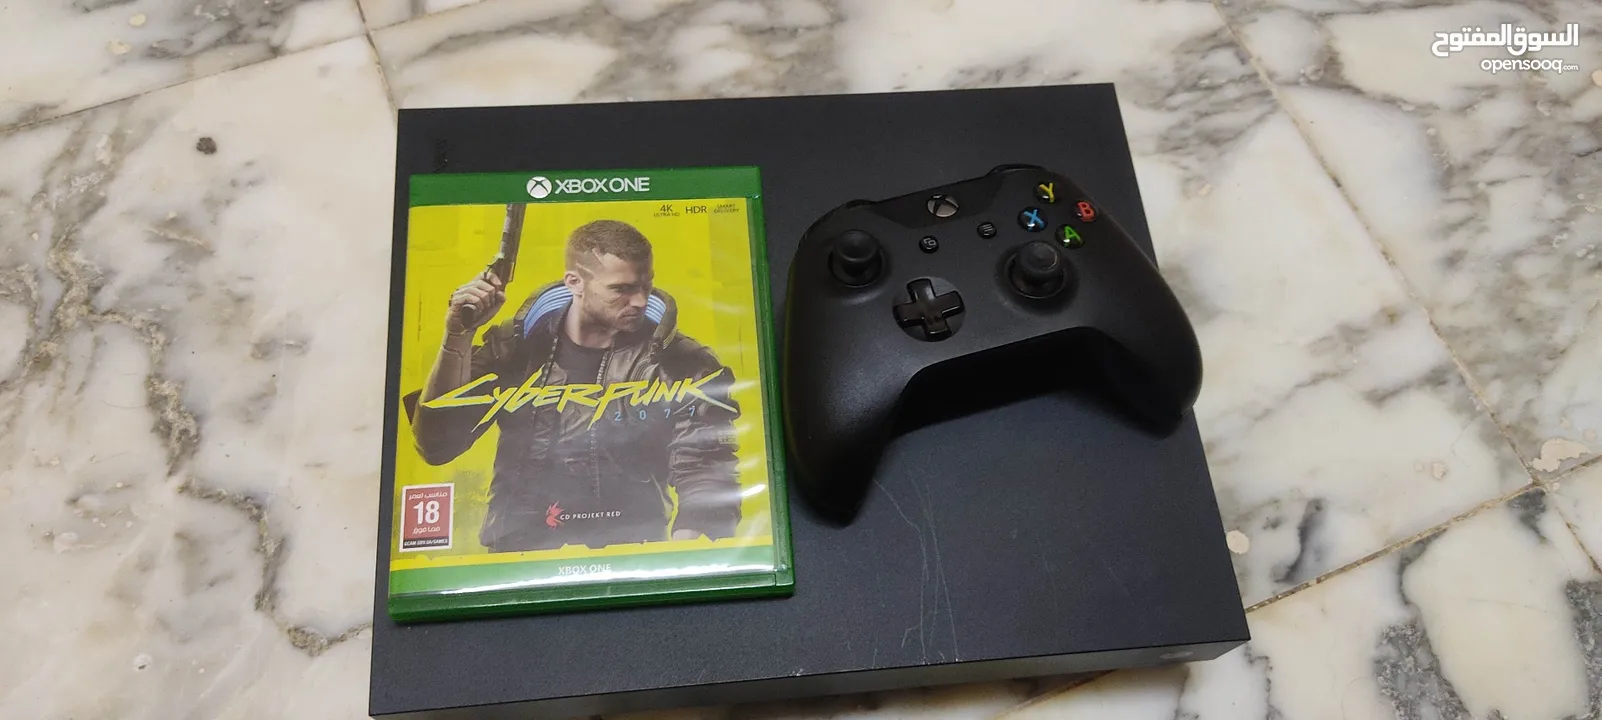 XBOX ONE X 1TB HDD 4K 30FPS  1080P 60FPS 1 FREE GAME ( CYBERPUNK) NO BOX 1 CONSOLE 1 CONTROLLER